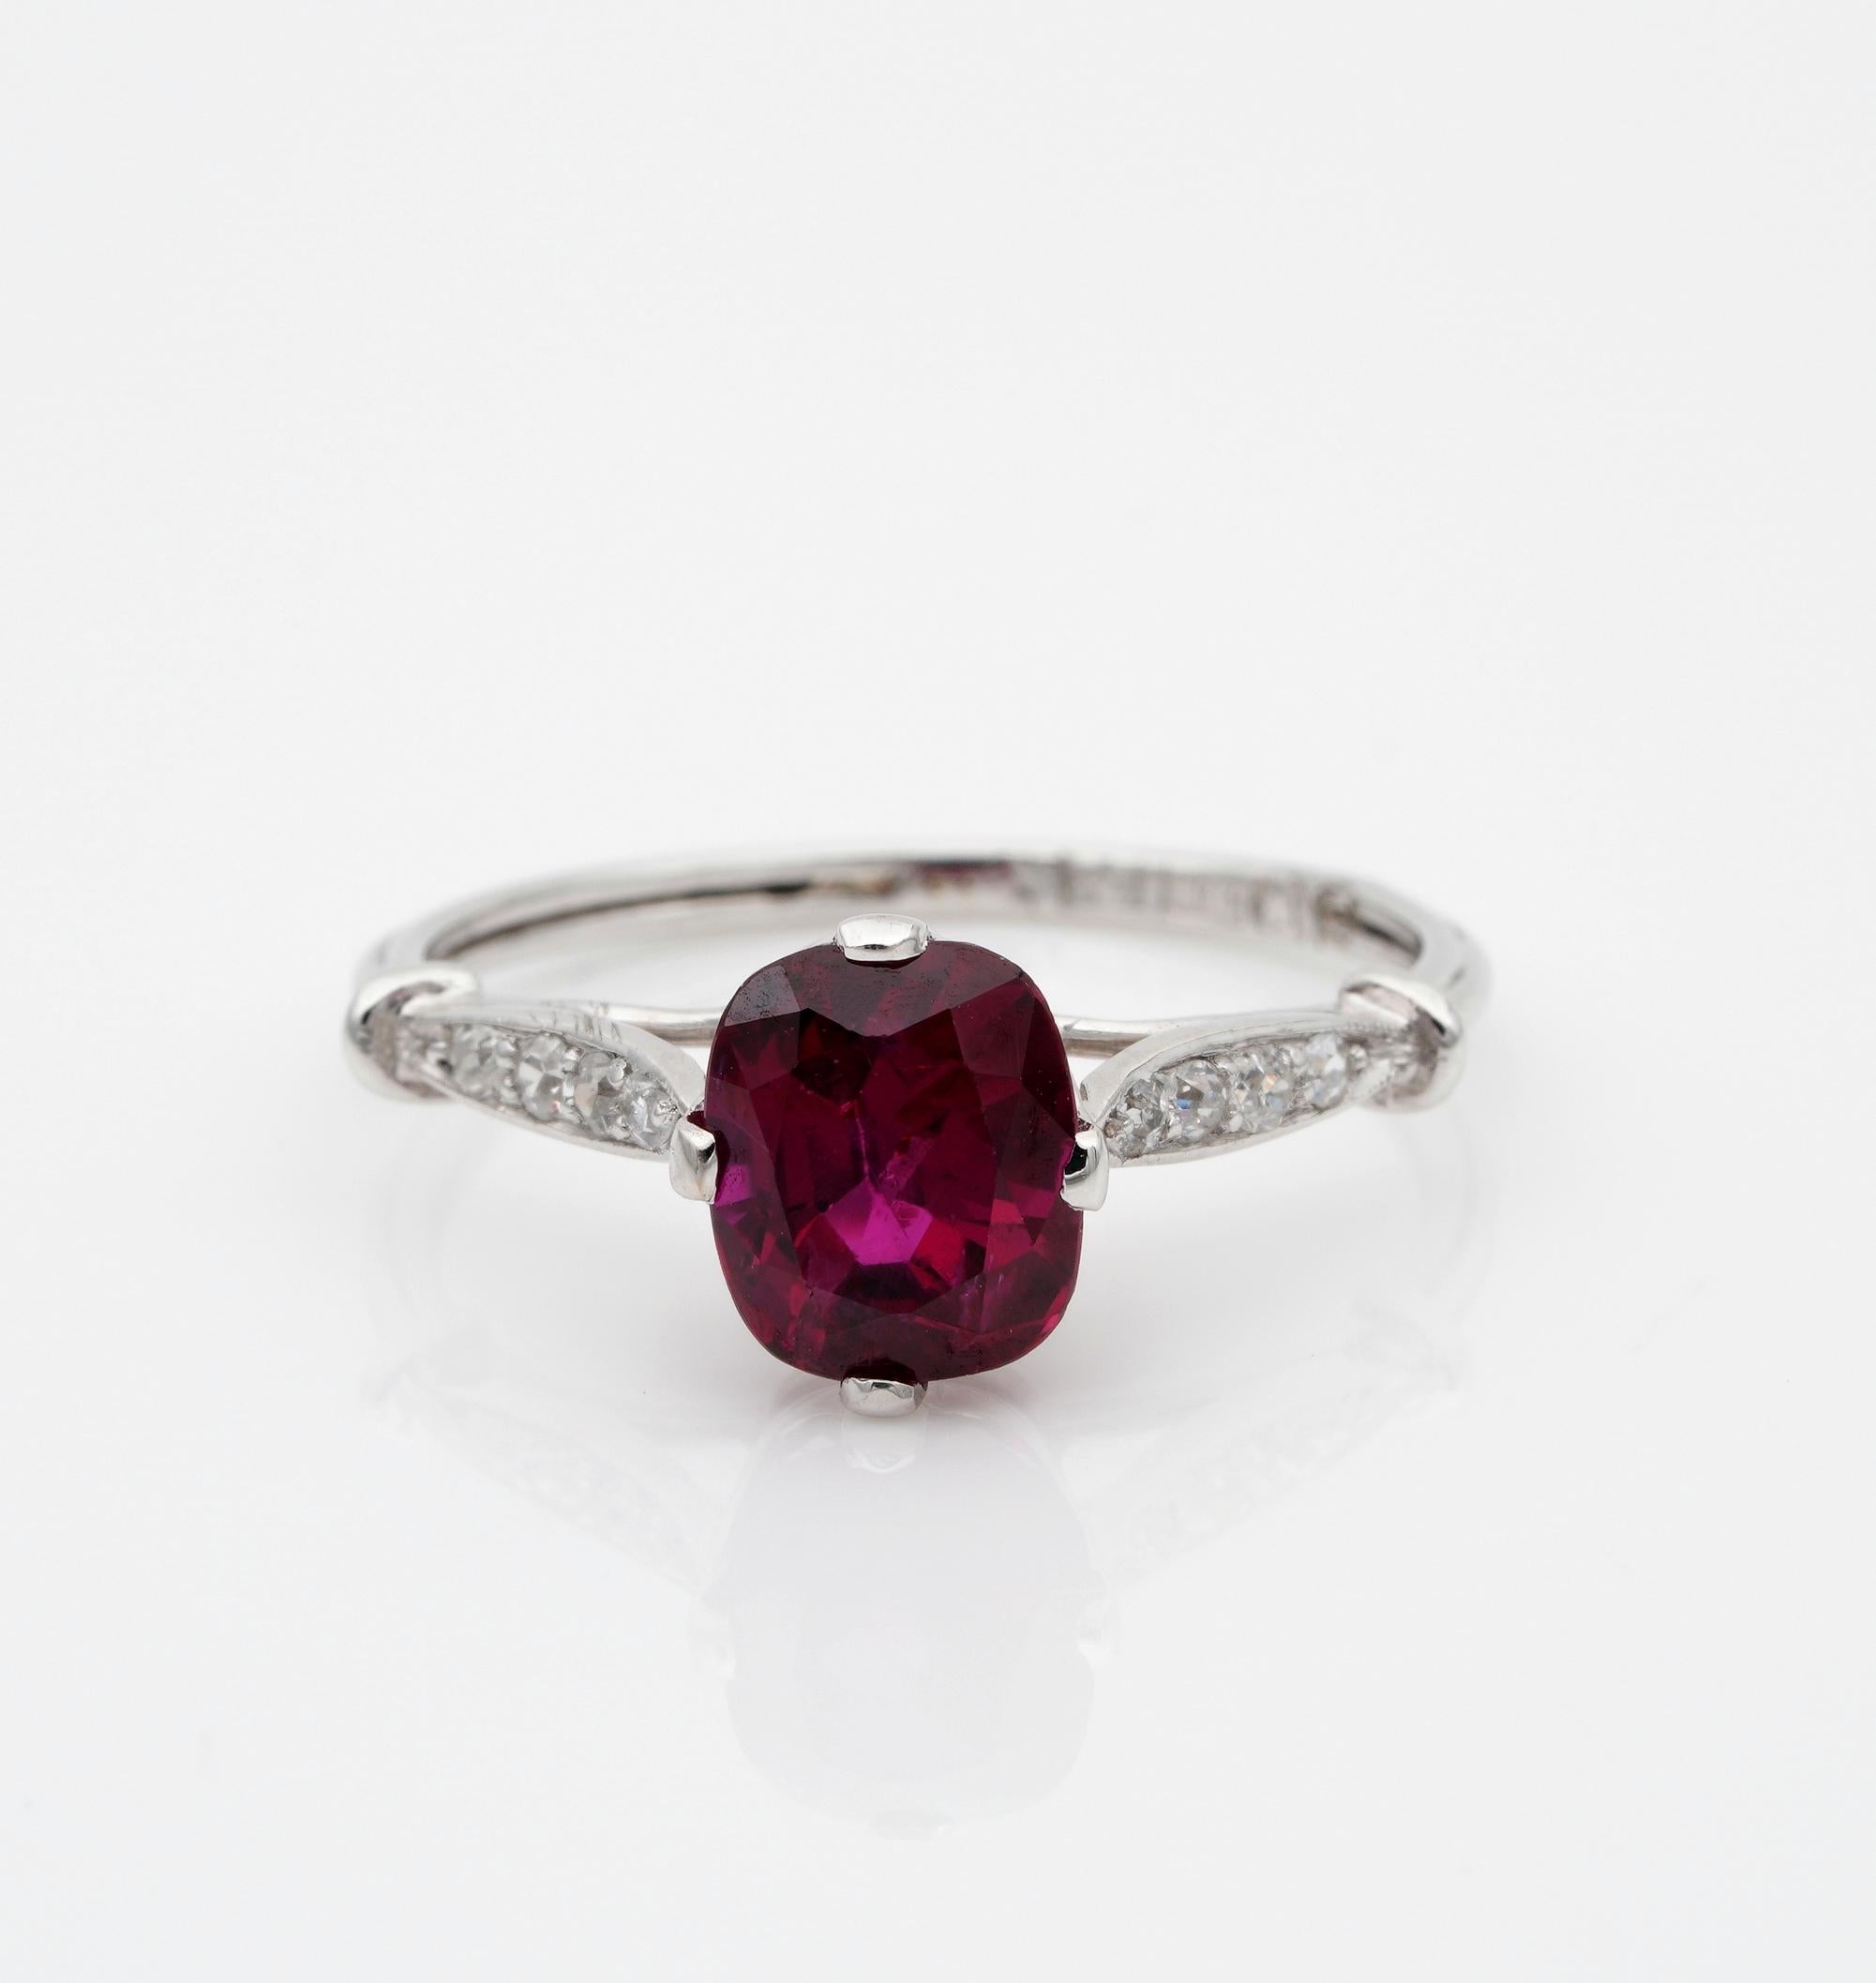 Dreaming Colour

If a fine Ruby ring is in your dreams, put your thoughts on this outstanding Art Deco ring featuring one of the finest in colour and clarity all natural made by mother nature – no heat or treated in any way – Siam (Thai) origin Ruby